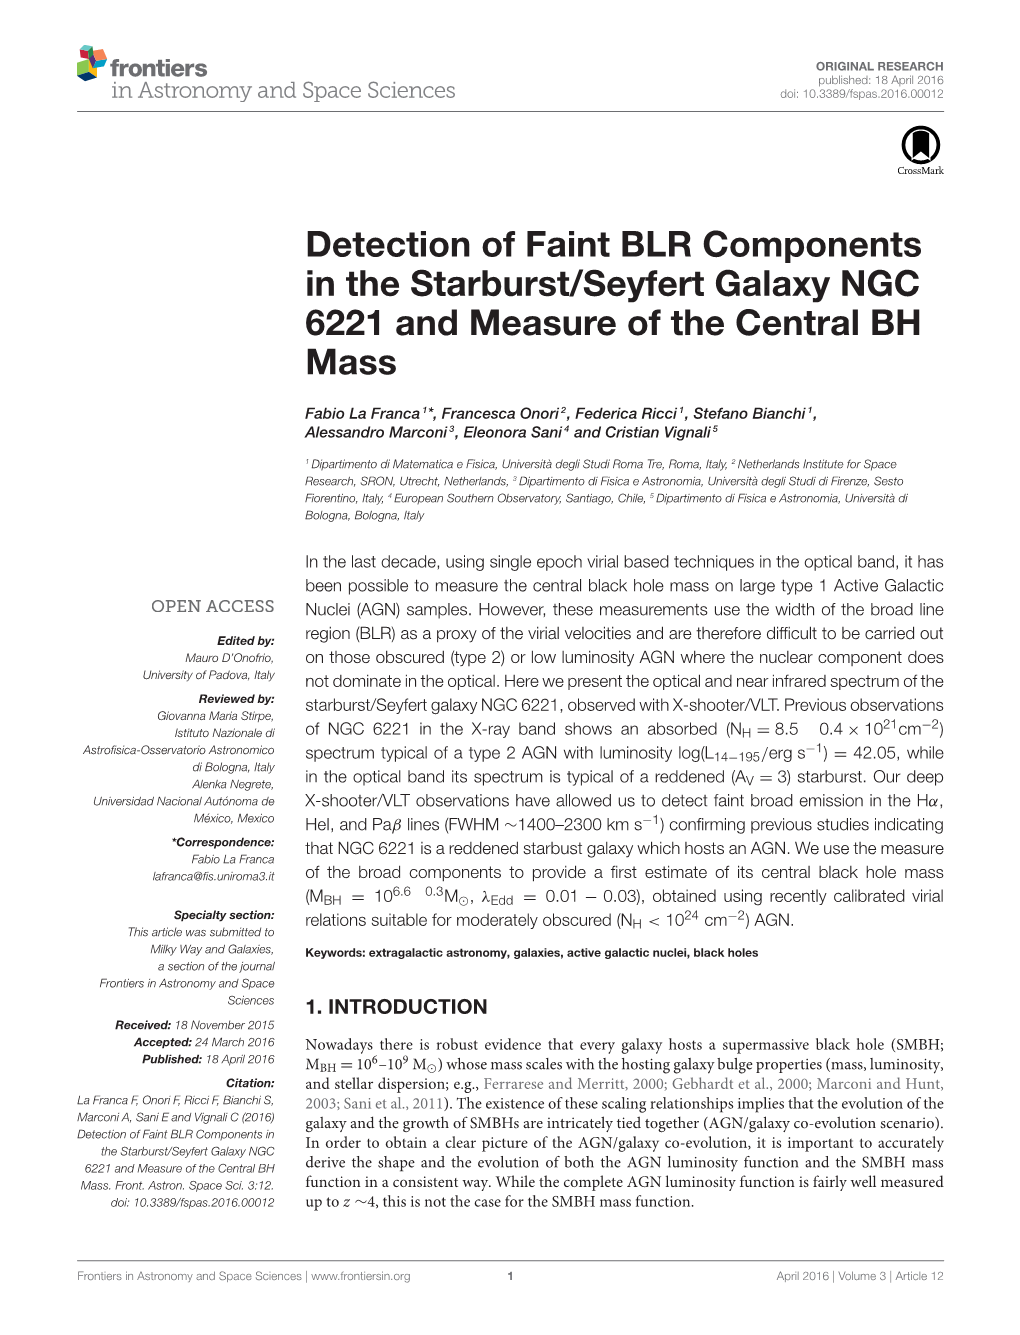 Detection of Faint BLR Components in the Starburst/Seyfert Galaxy NGC 6221 and Measure of the Central BH Mass